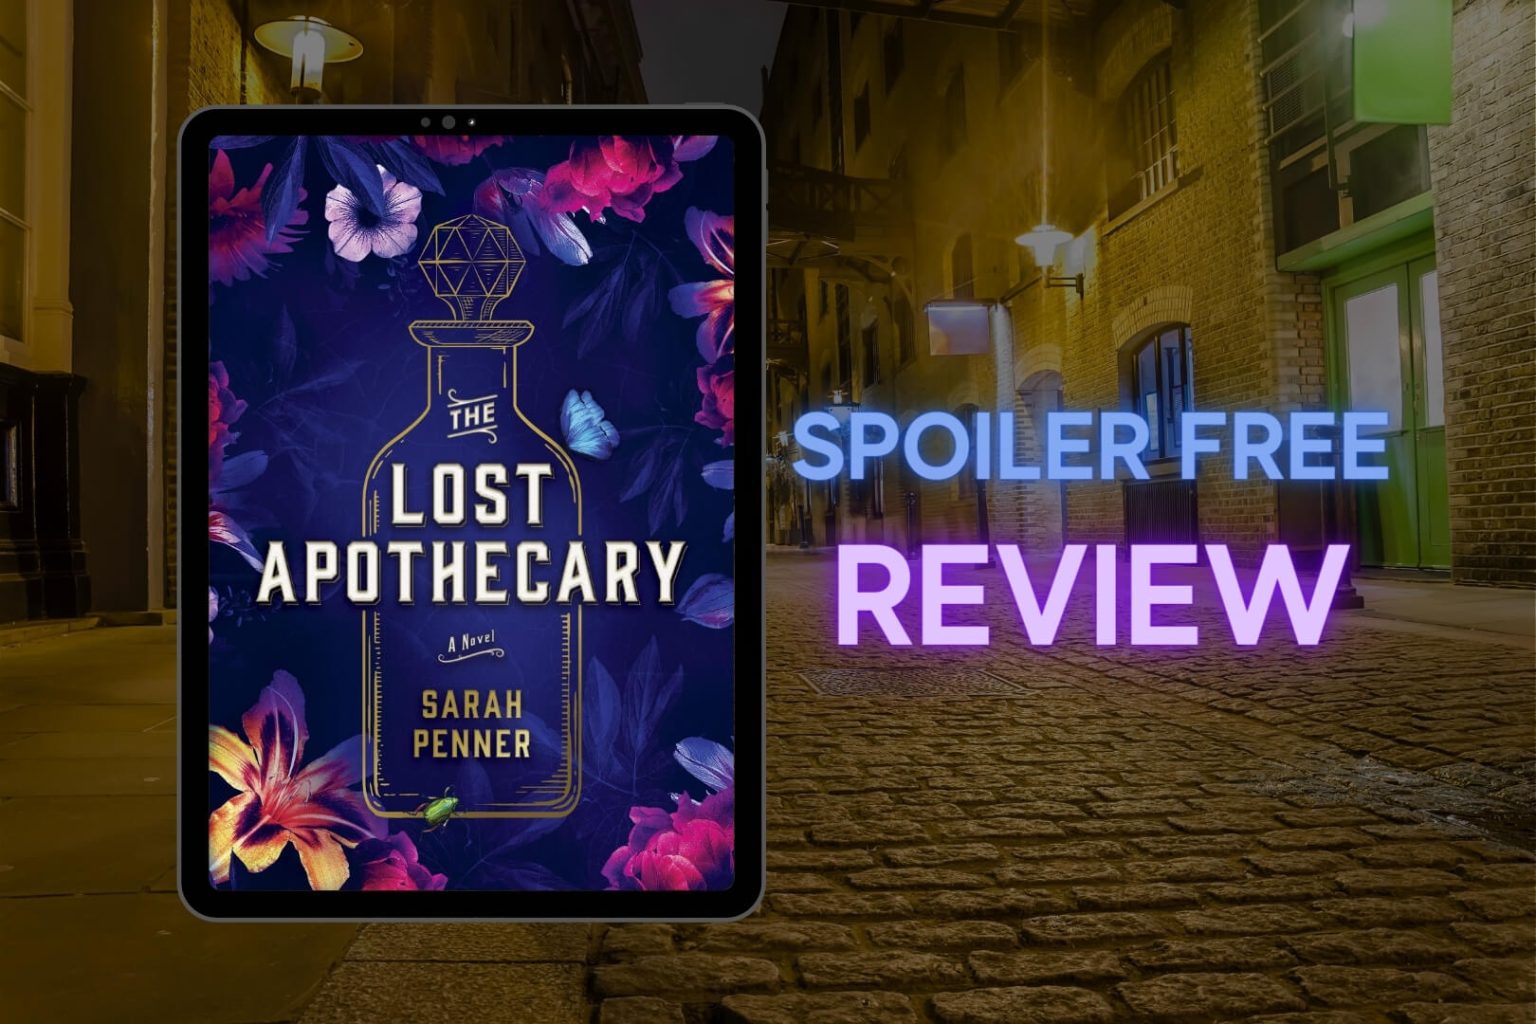 the lost apothecary by sarah penner